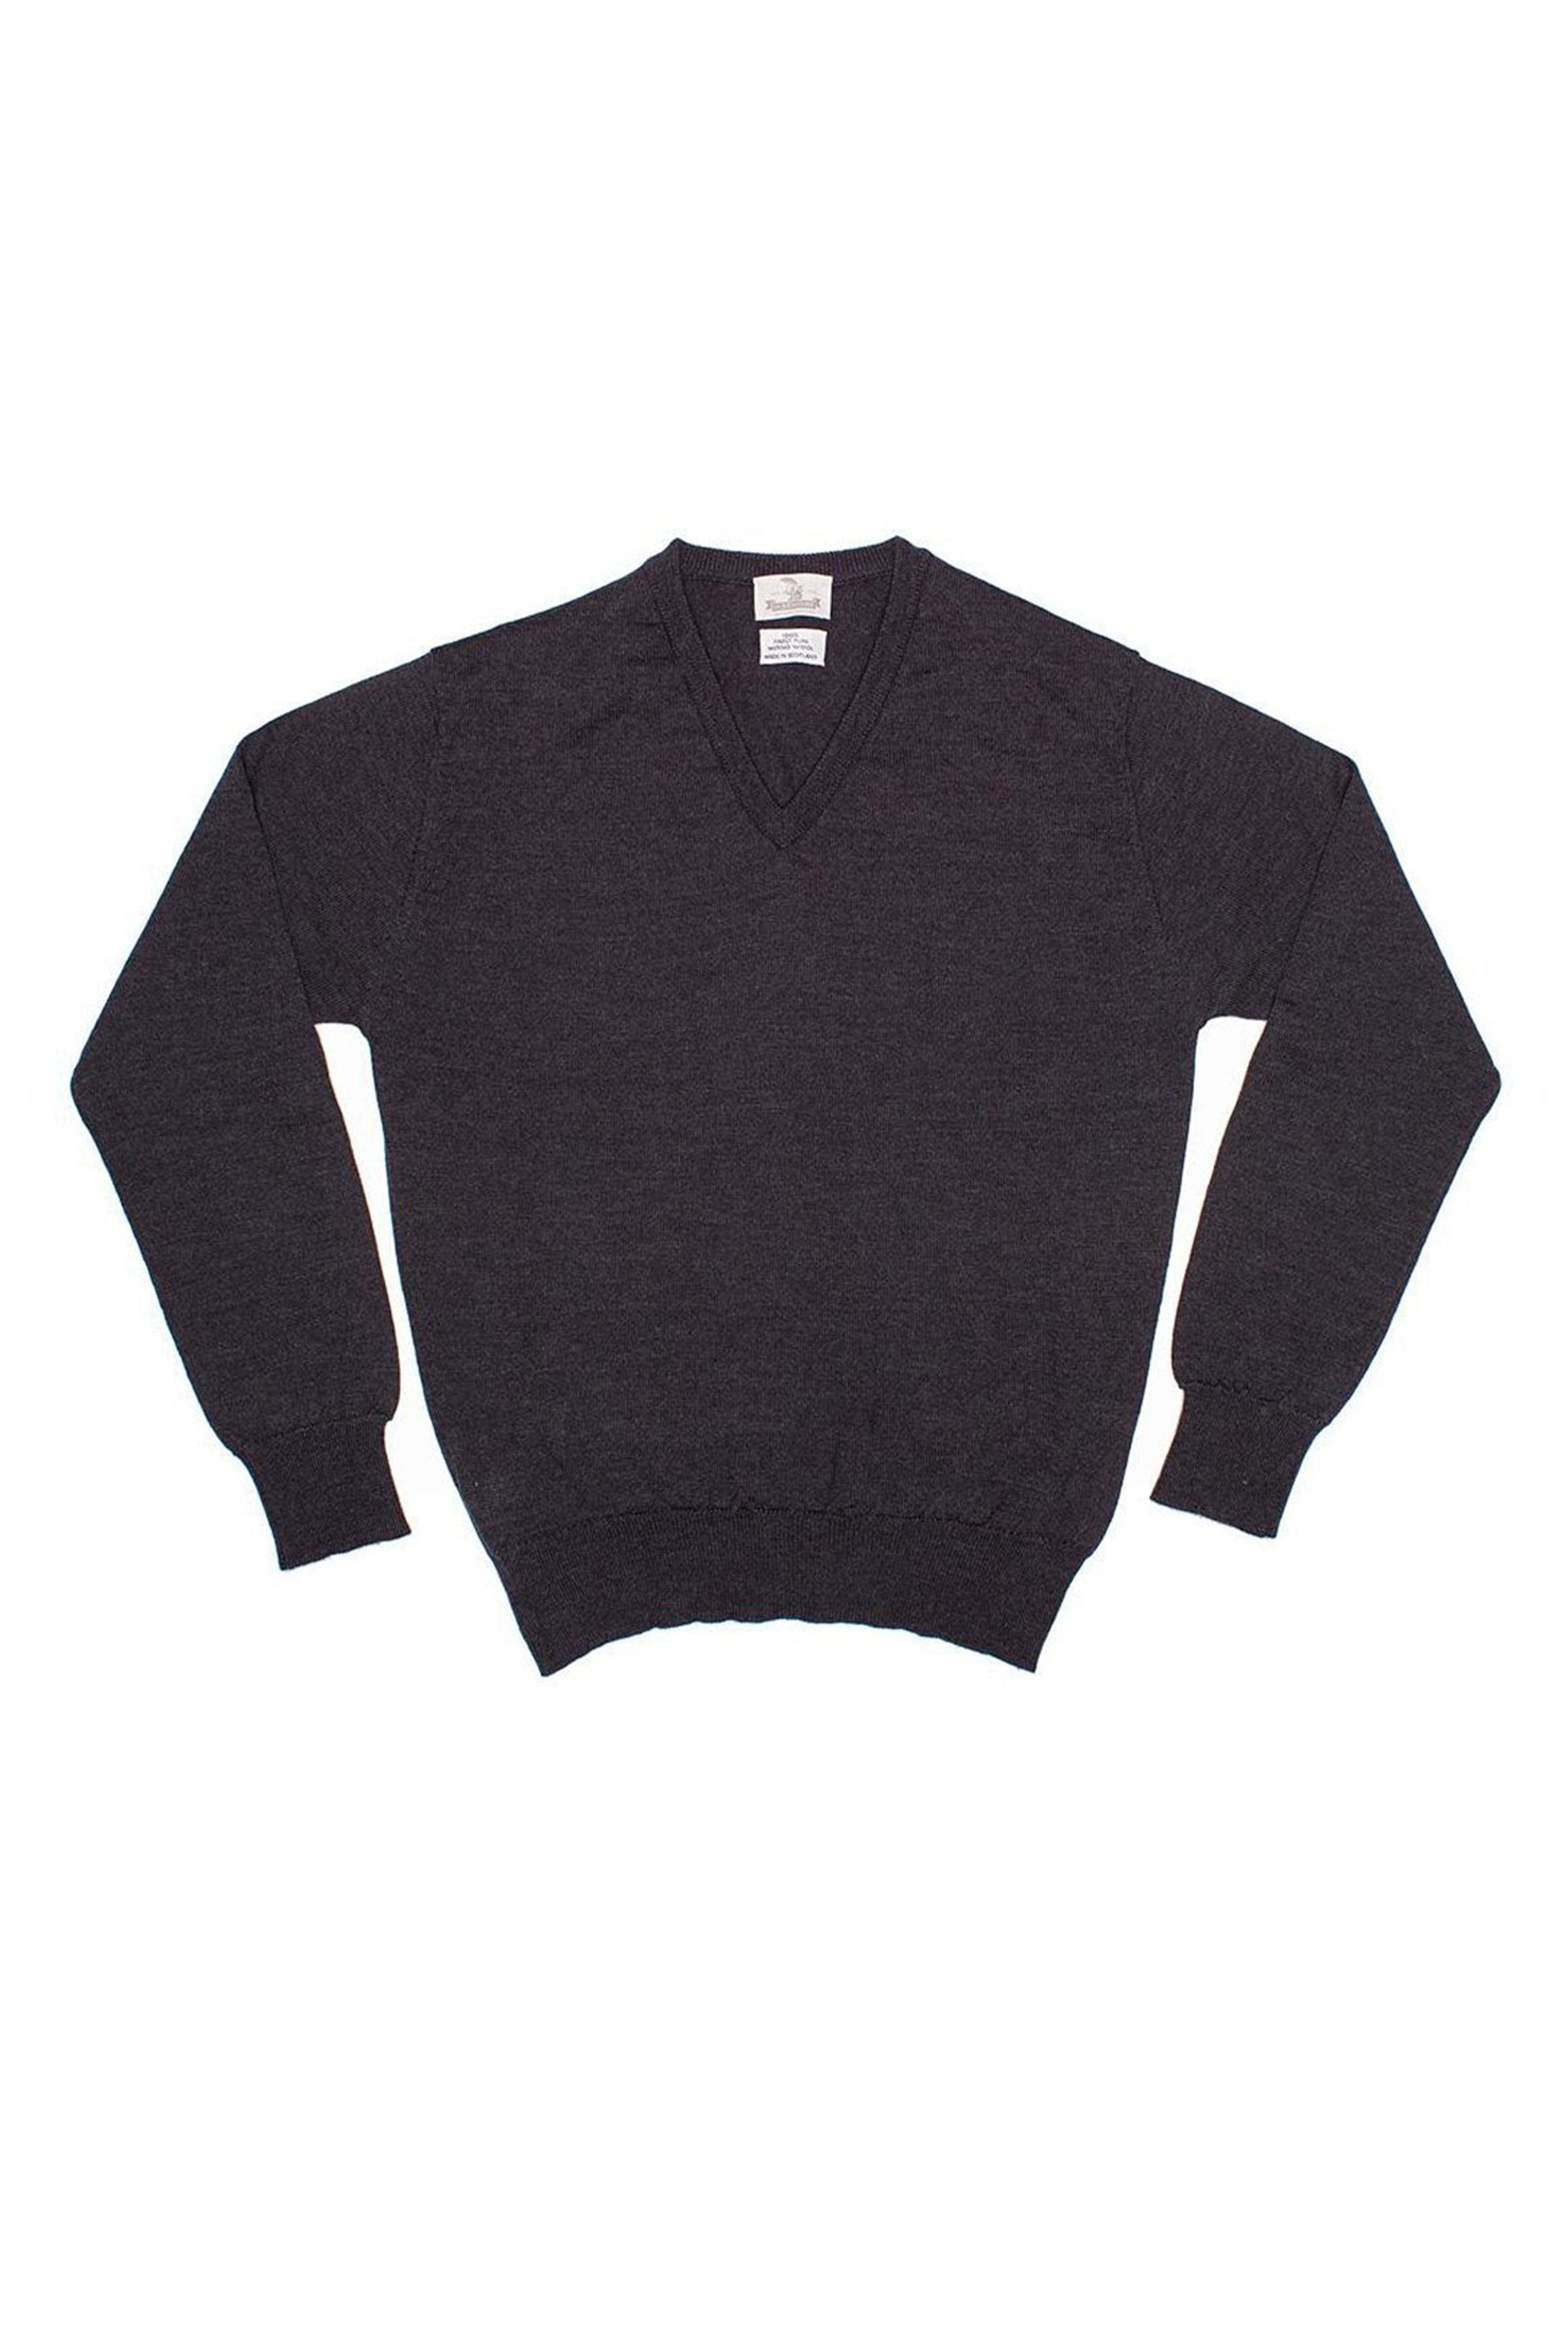 The Armoury Charcoal Merino V Neck Sweater